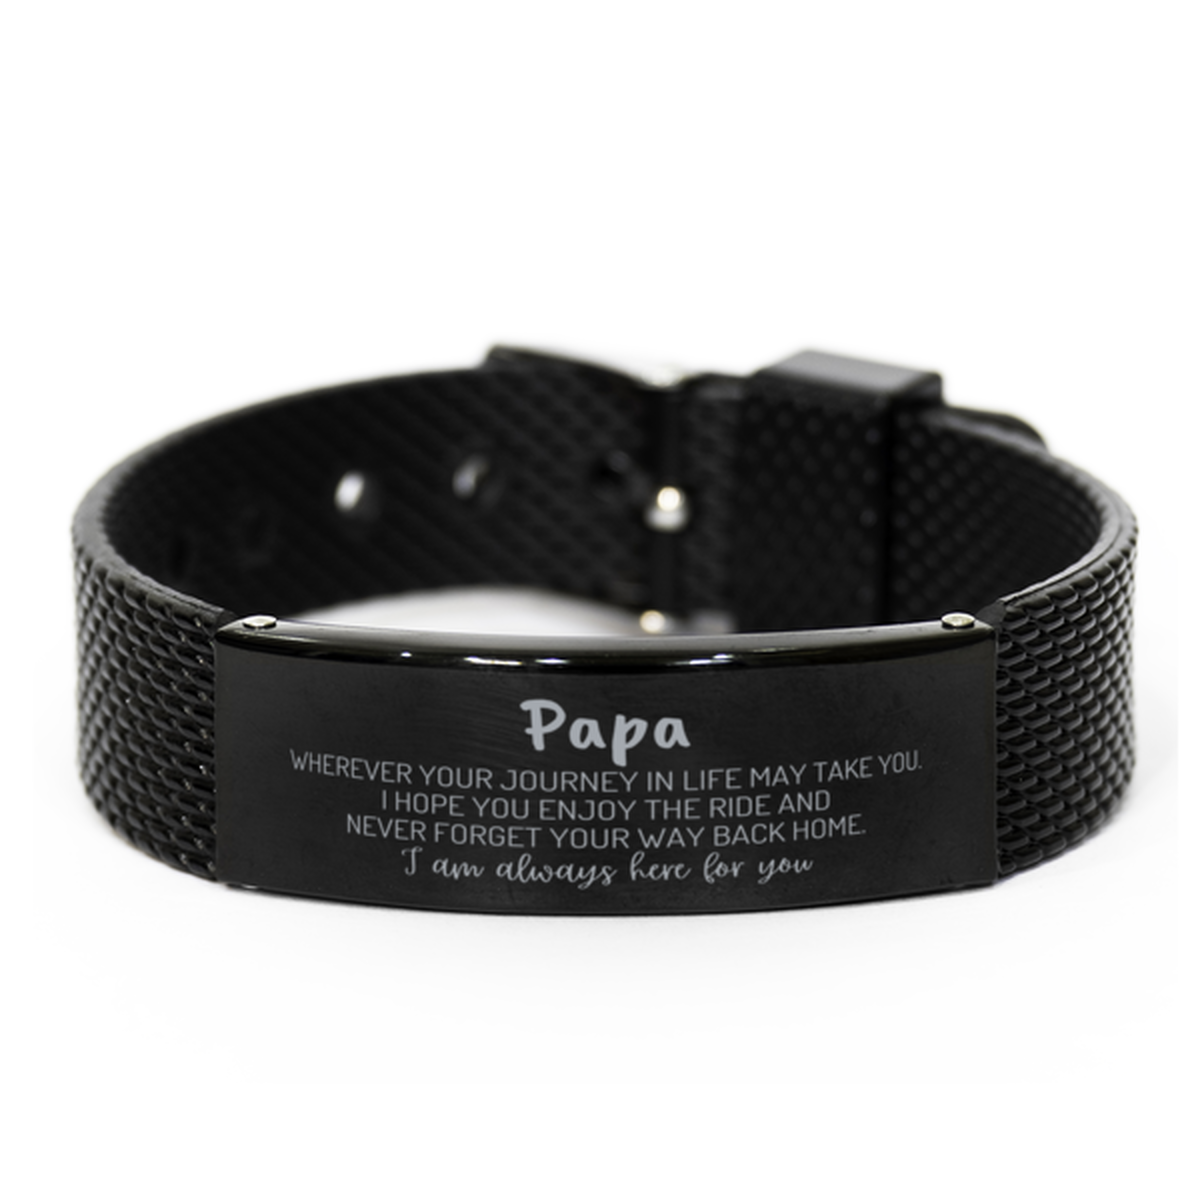 Papa wherever your journey in life may take you, I am always here for you Papa Black Shark Mesh Bracelet, Awesome Christmas Gifts For Papa, Papa Birthday Gifts for Men Women Family Loved One